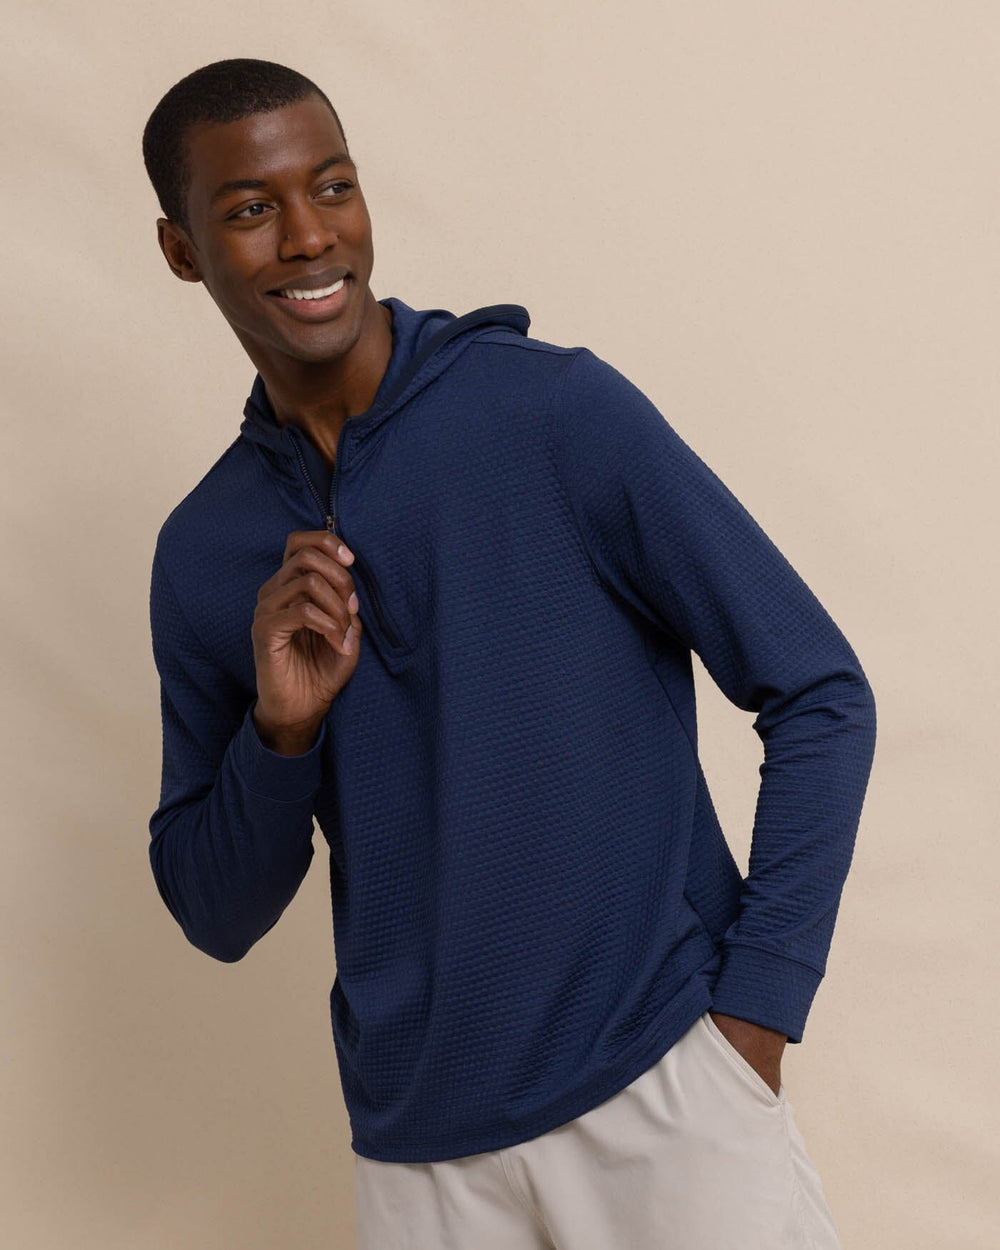 The front view of the Southern Tide Scuttle Heather Performance Quarter Zip Hoodie by Southern Tide - Heather True Navy